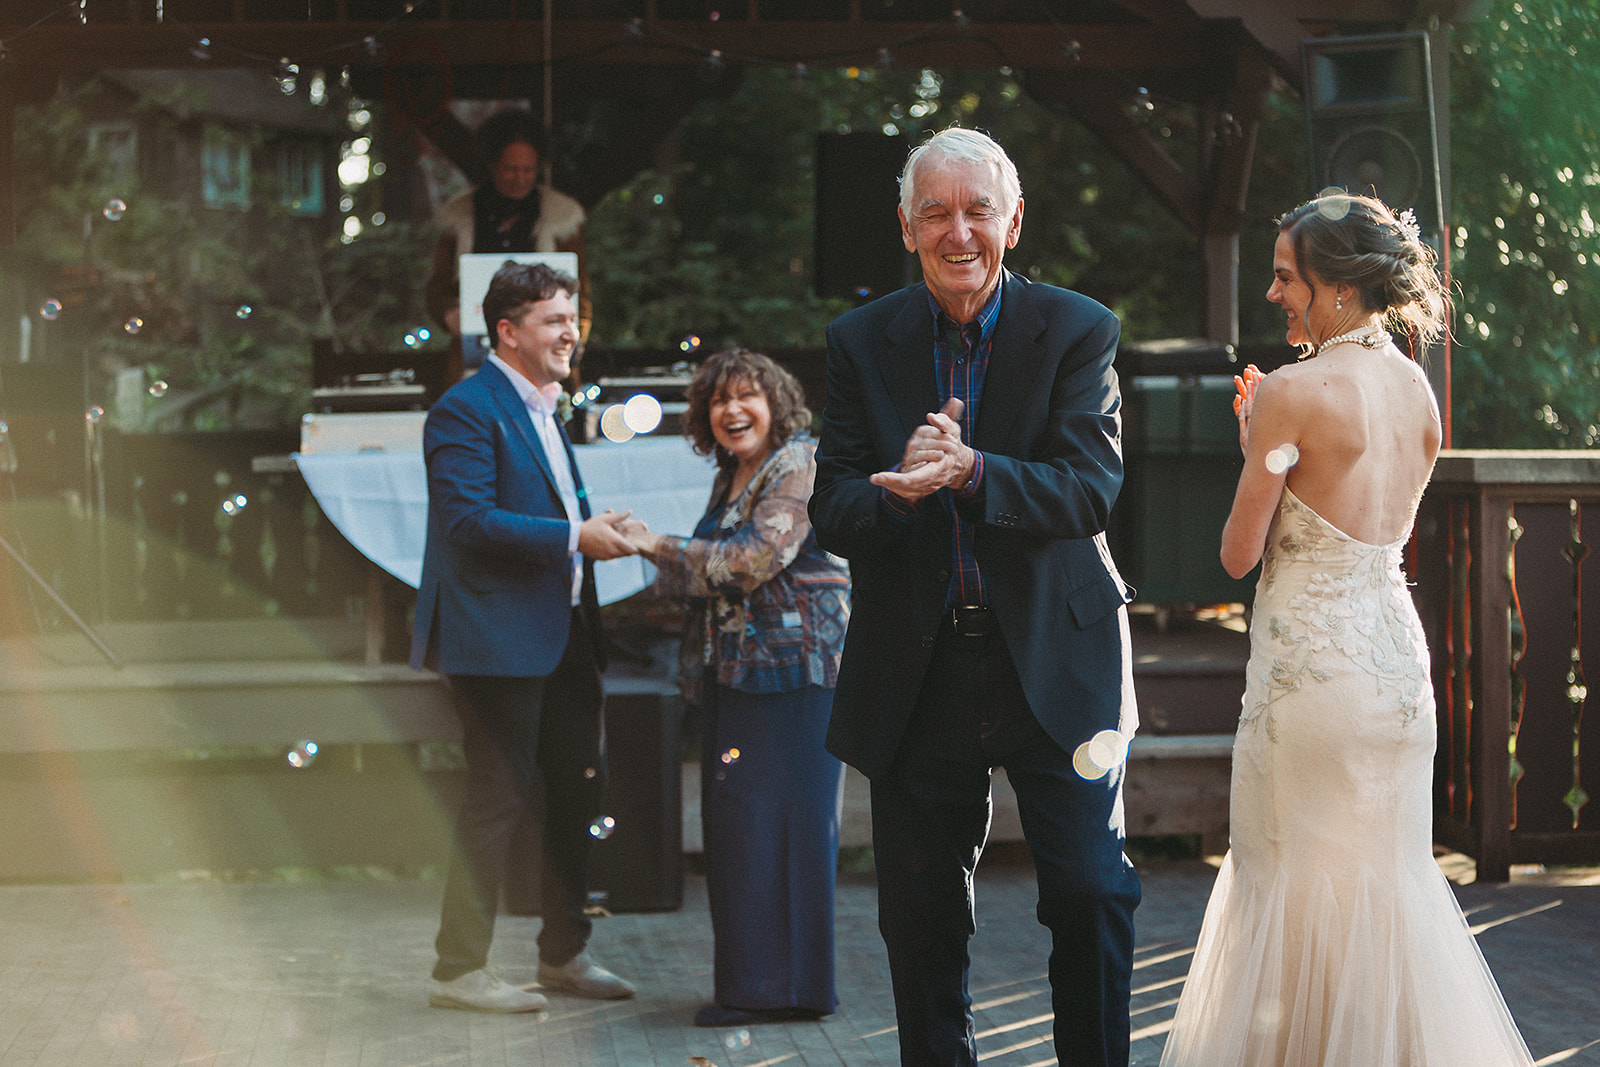 Bride and groom dancing with their parents